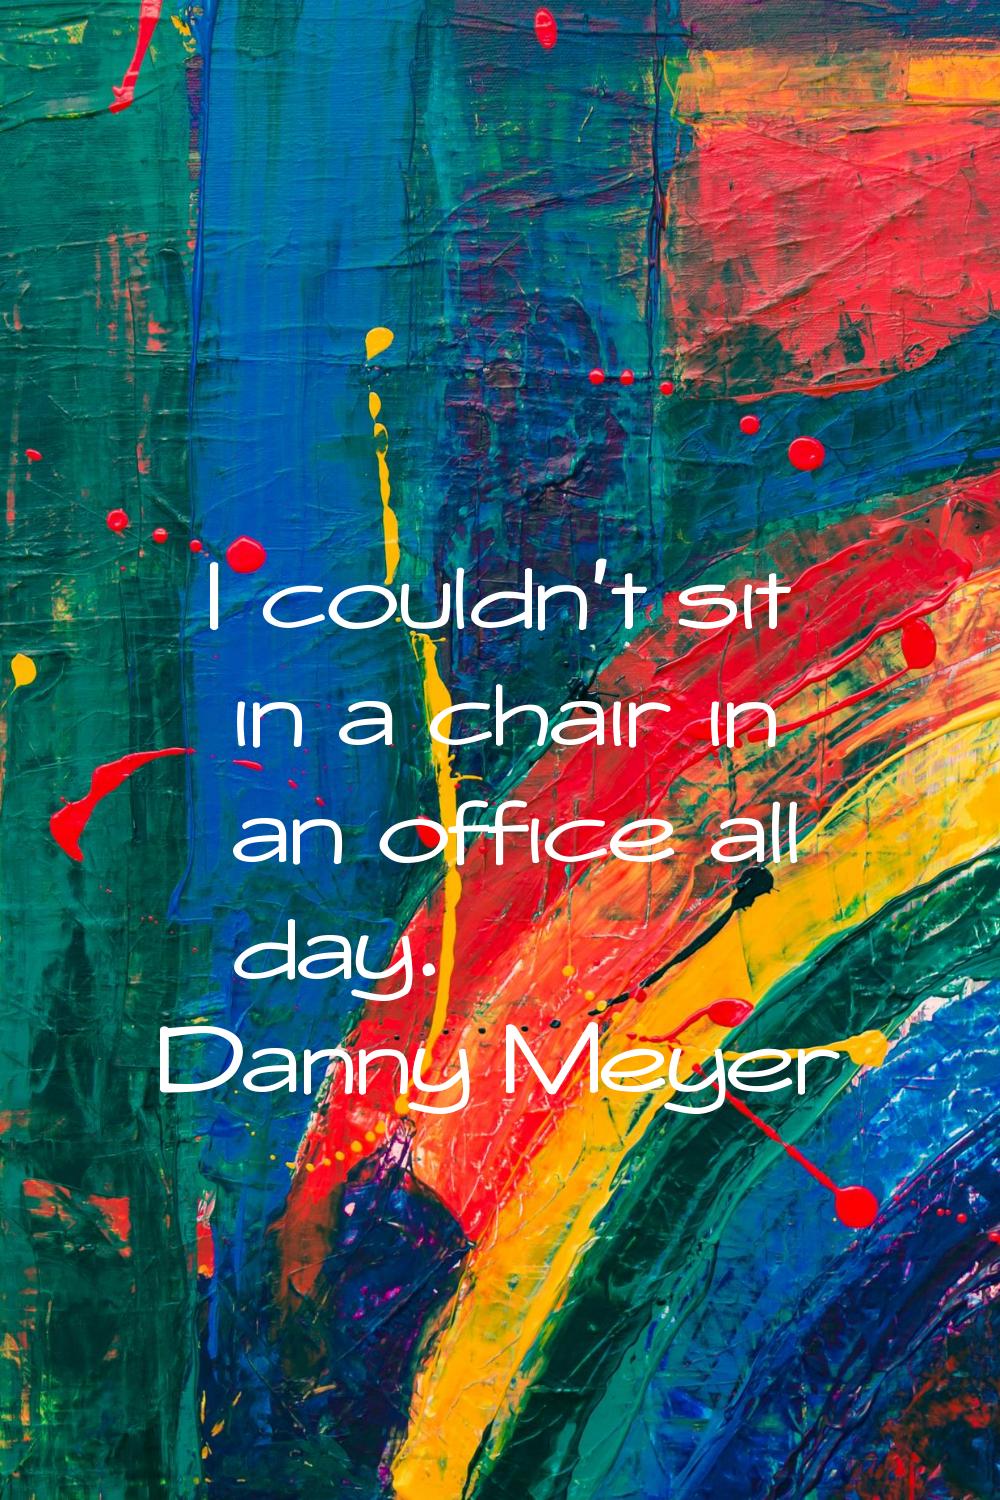 I couldn't sit in a chair in an office all day.